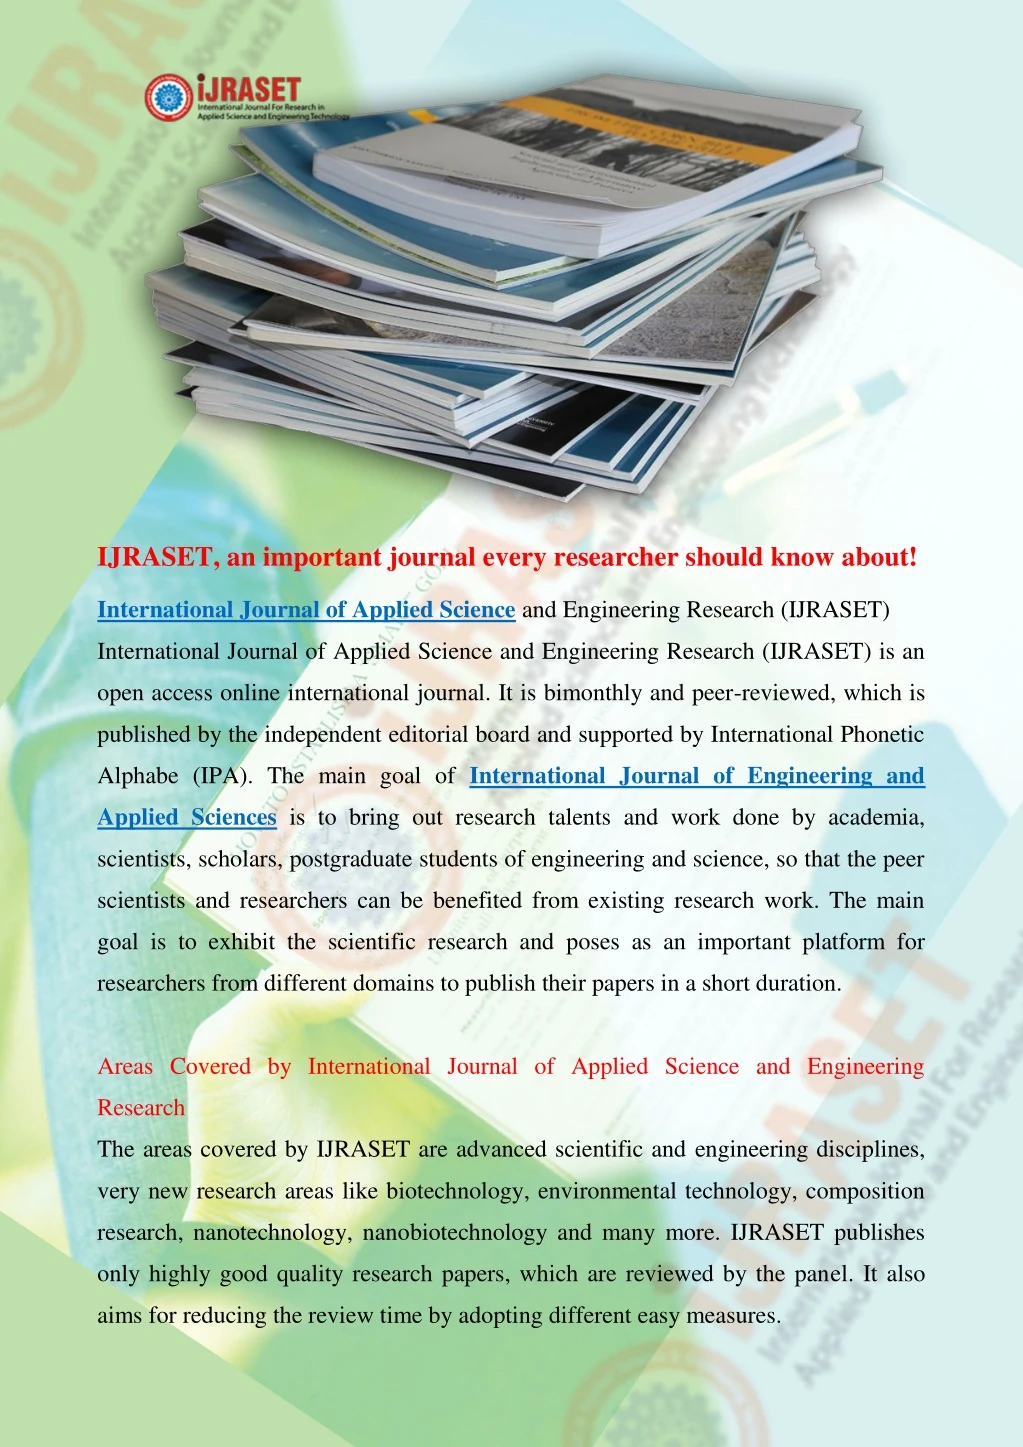 ijraset an important journal every researcher